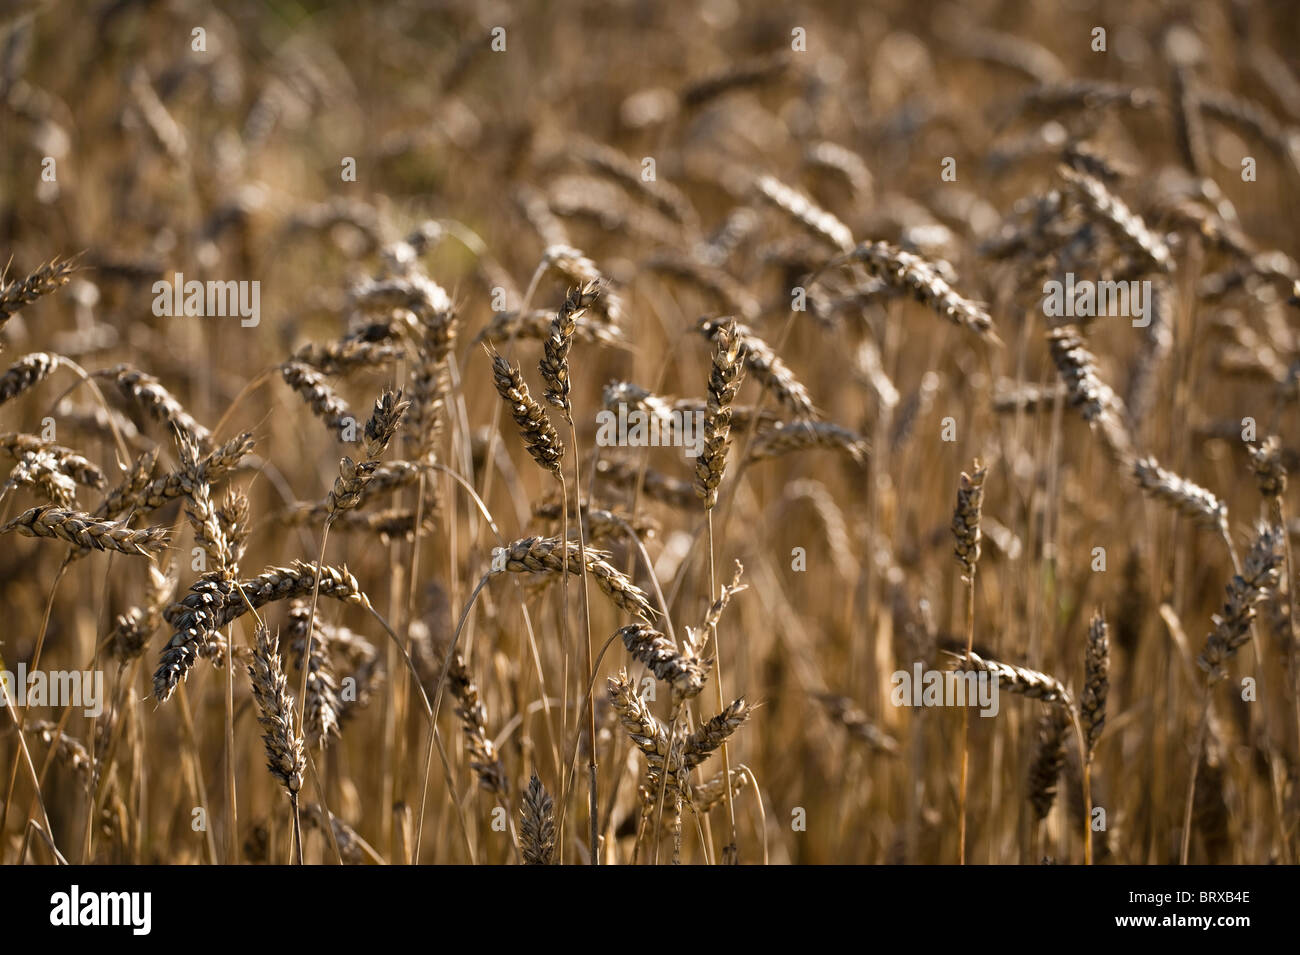 Wheat, Triticum aestivum, growing at The Eden Project in Cornwall, United Kingdom Stock Photo